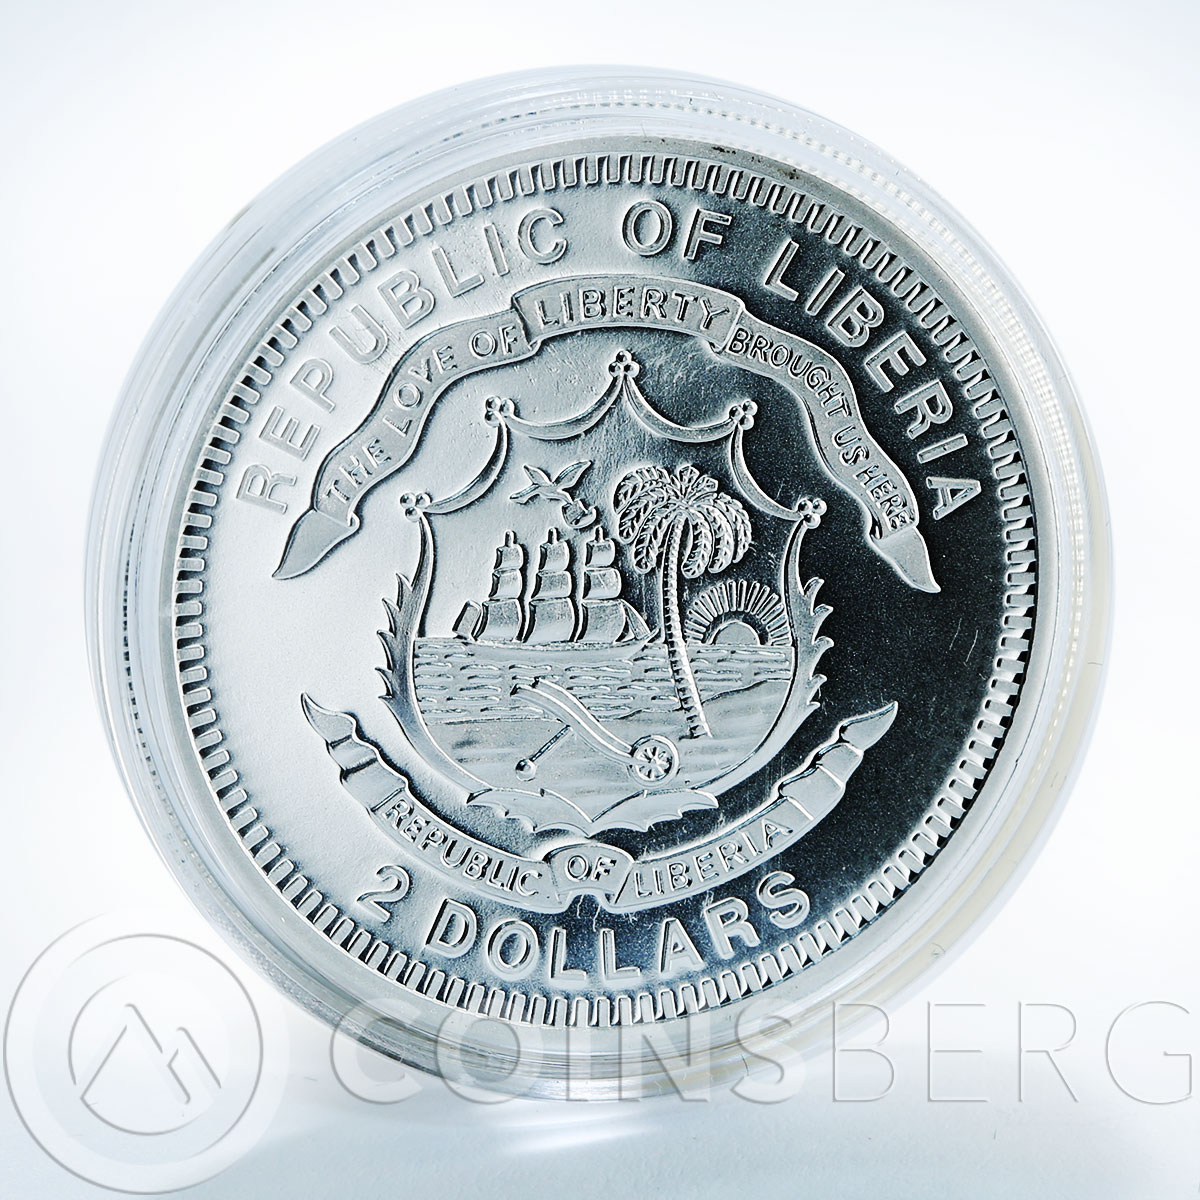 Liberia 2 dollars Merry Christmas and Happy New Year bells silver coin 2010